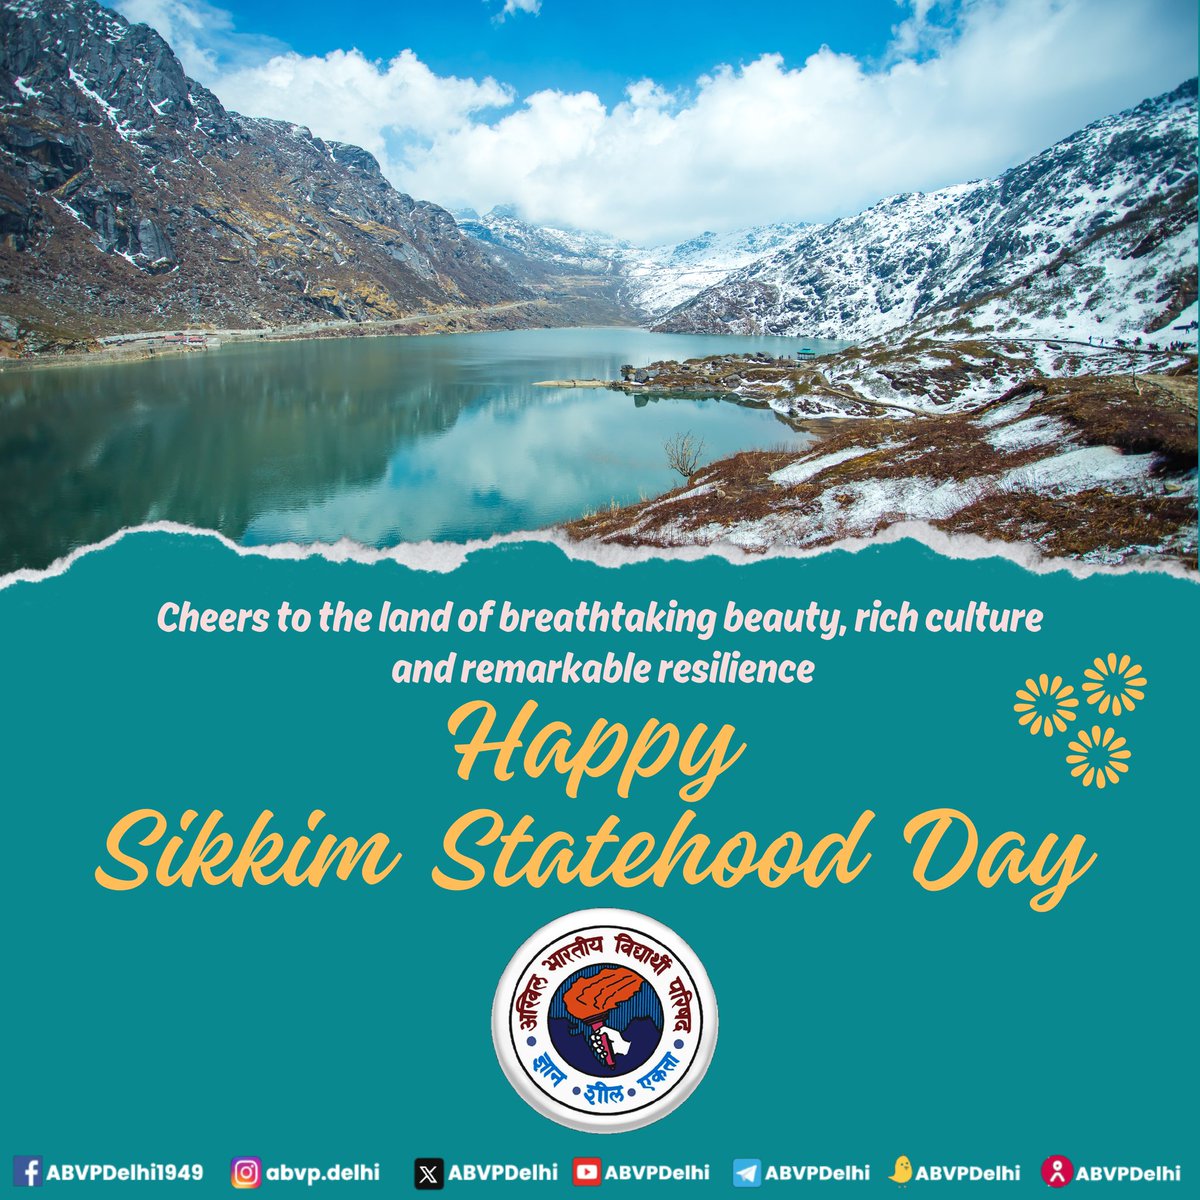 Cheers to the land of breathtaking beauty, rich culture and remarkable resilience. Happy Statehood Day, Sikkim! 🏞️🎉 #SikkimStatehoodDay #PrideoftheHimalayas